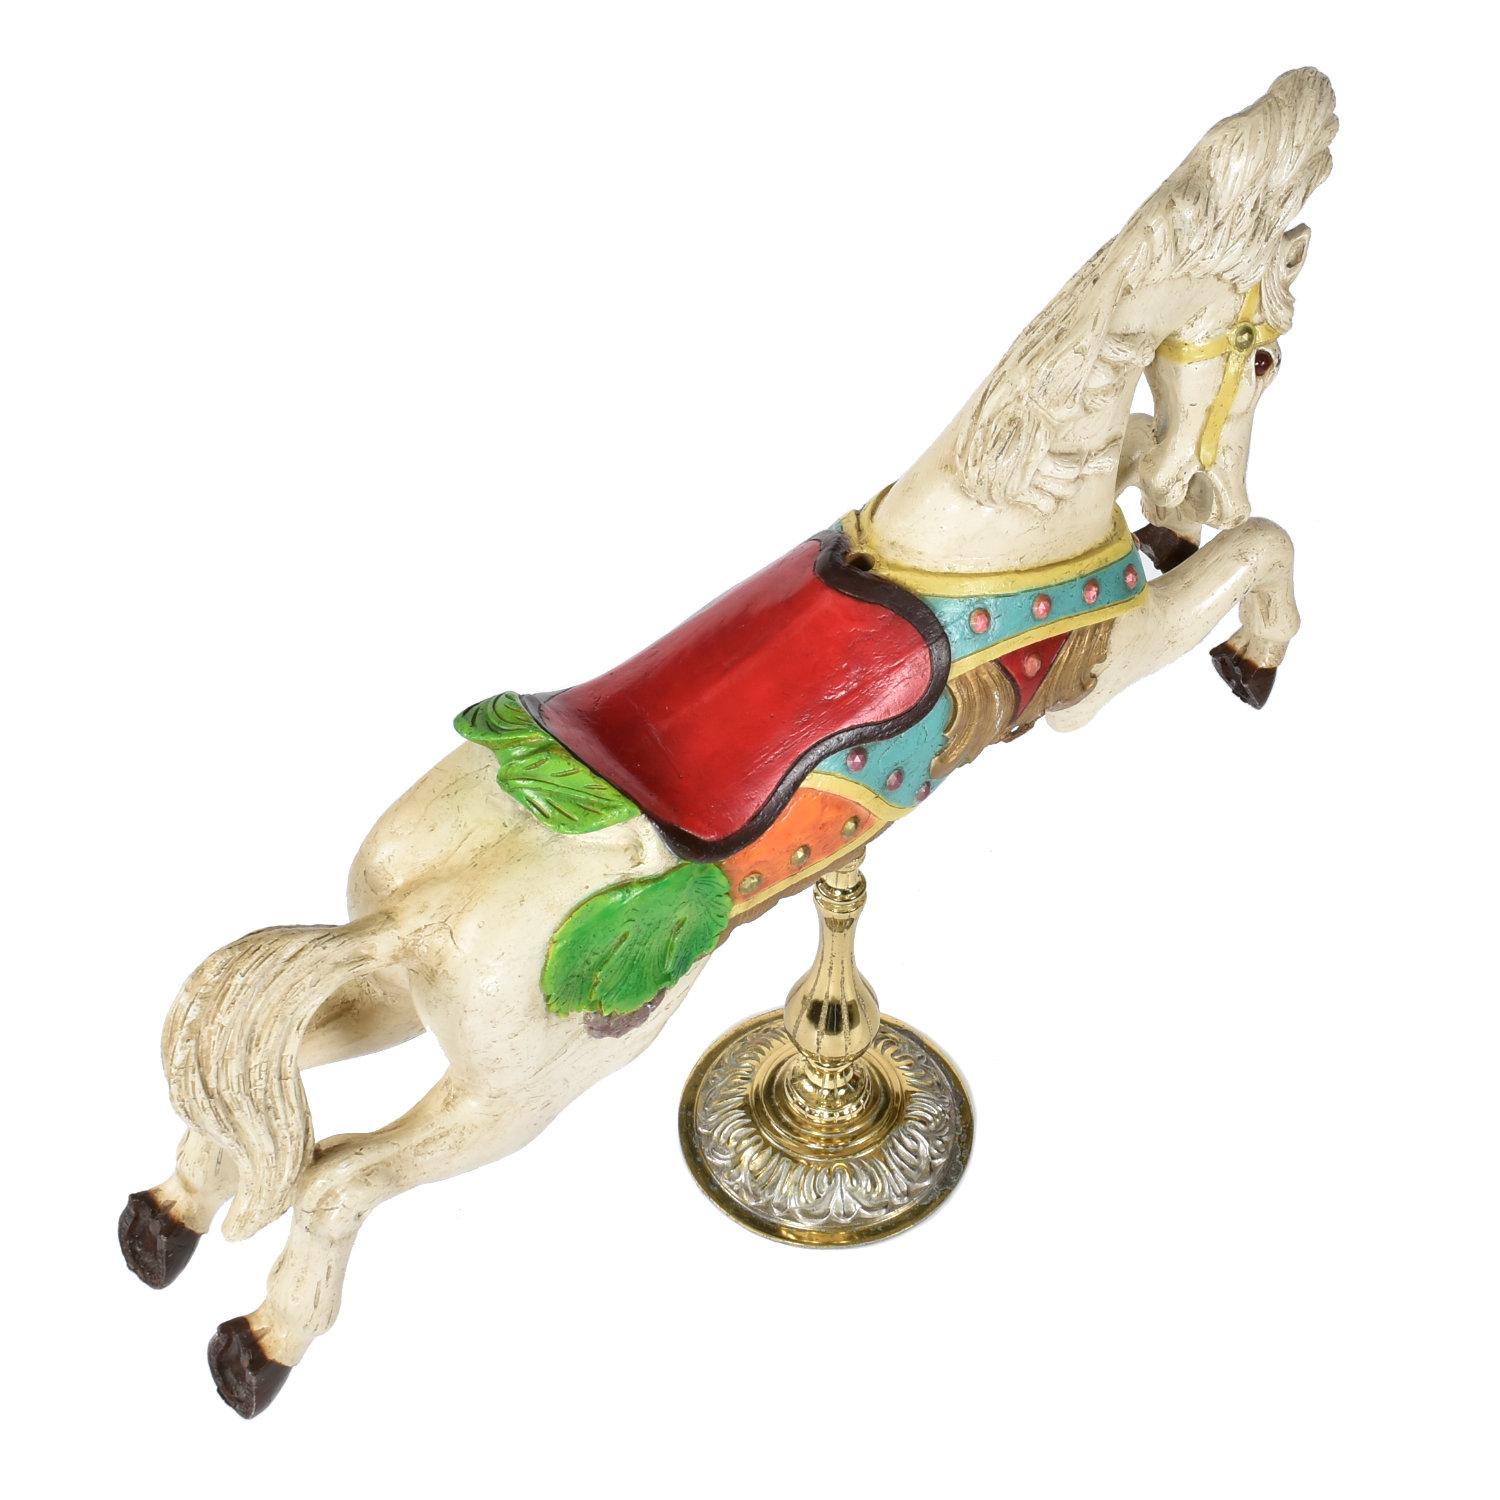 Hollywood Regency Hand Painted Midcentury Resin White Jumper Carousel Horse by C.W. Parker For Sale